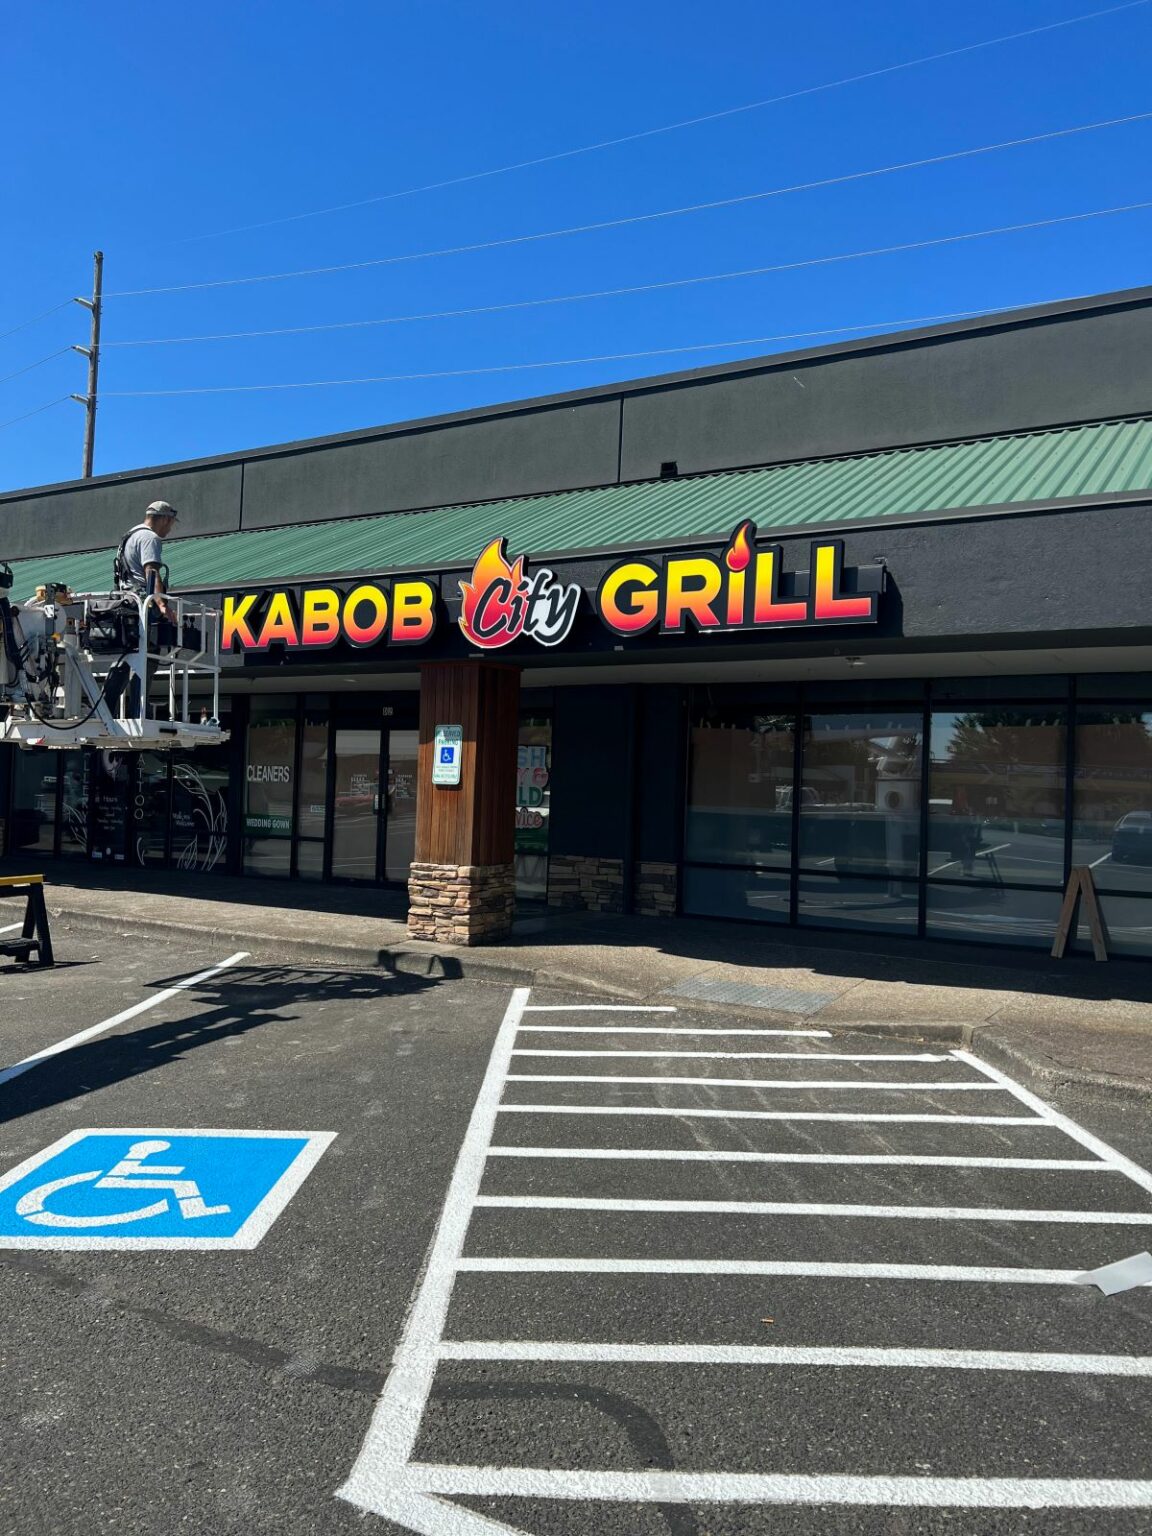 Kabob City Grill Set To Open In Vancouver 1 1152x1536 